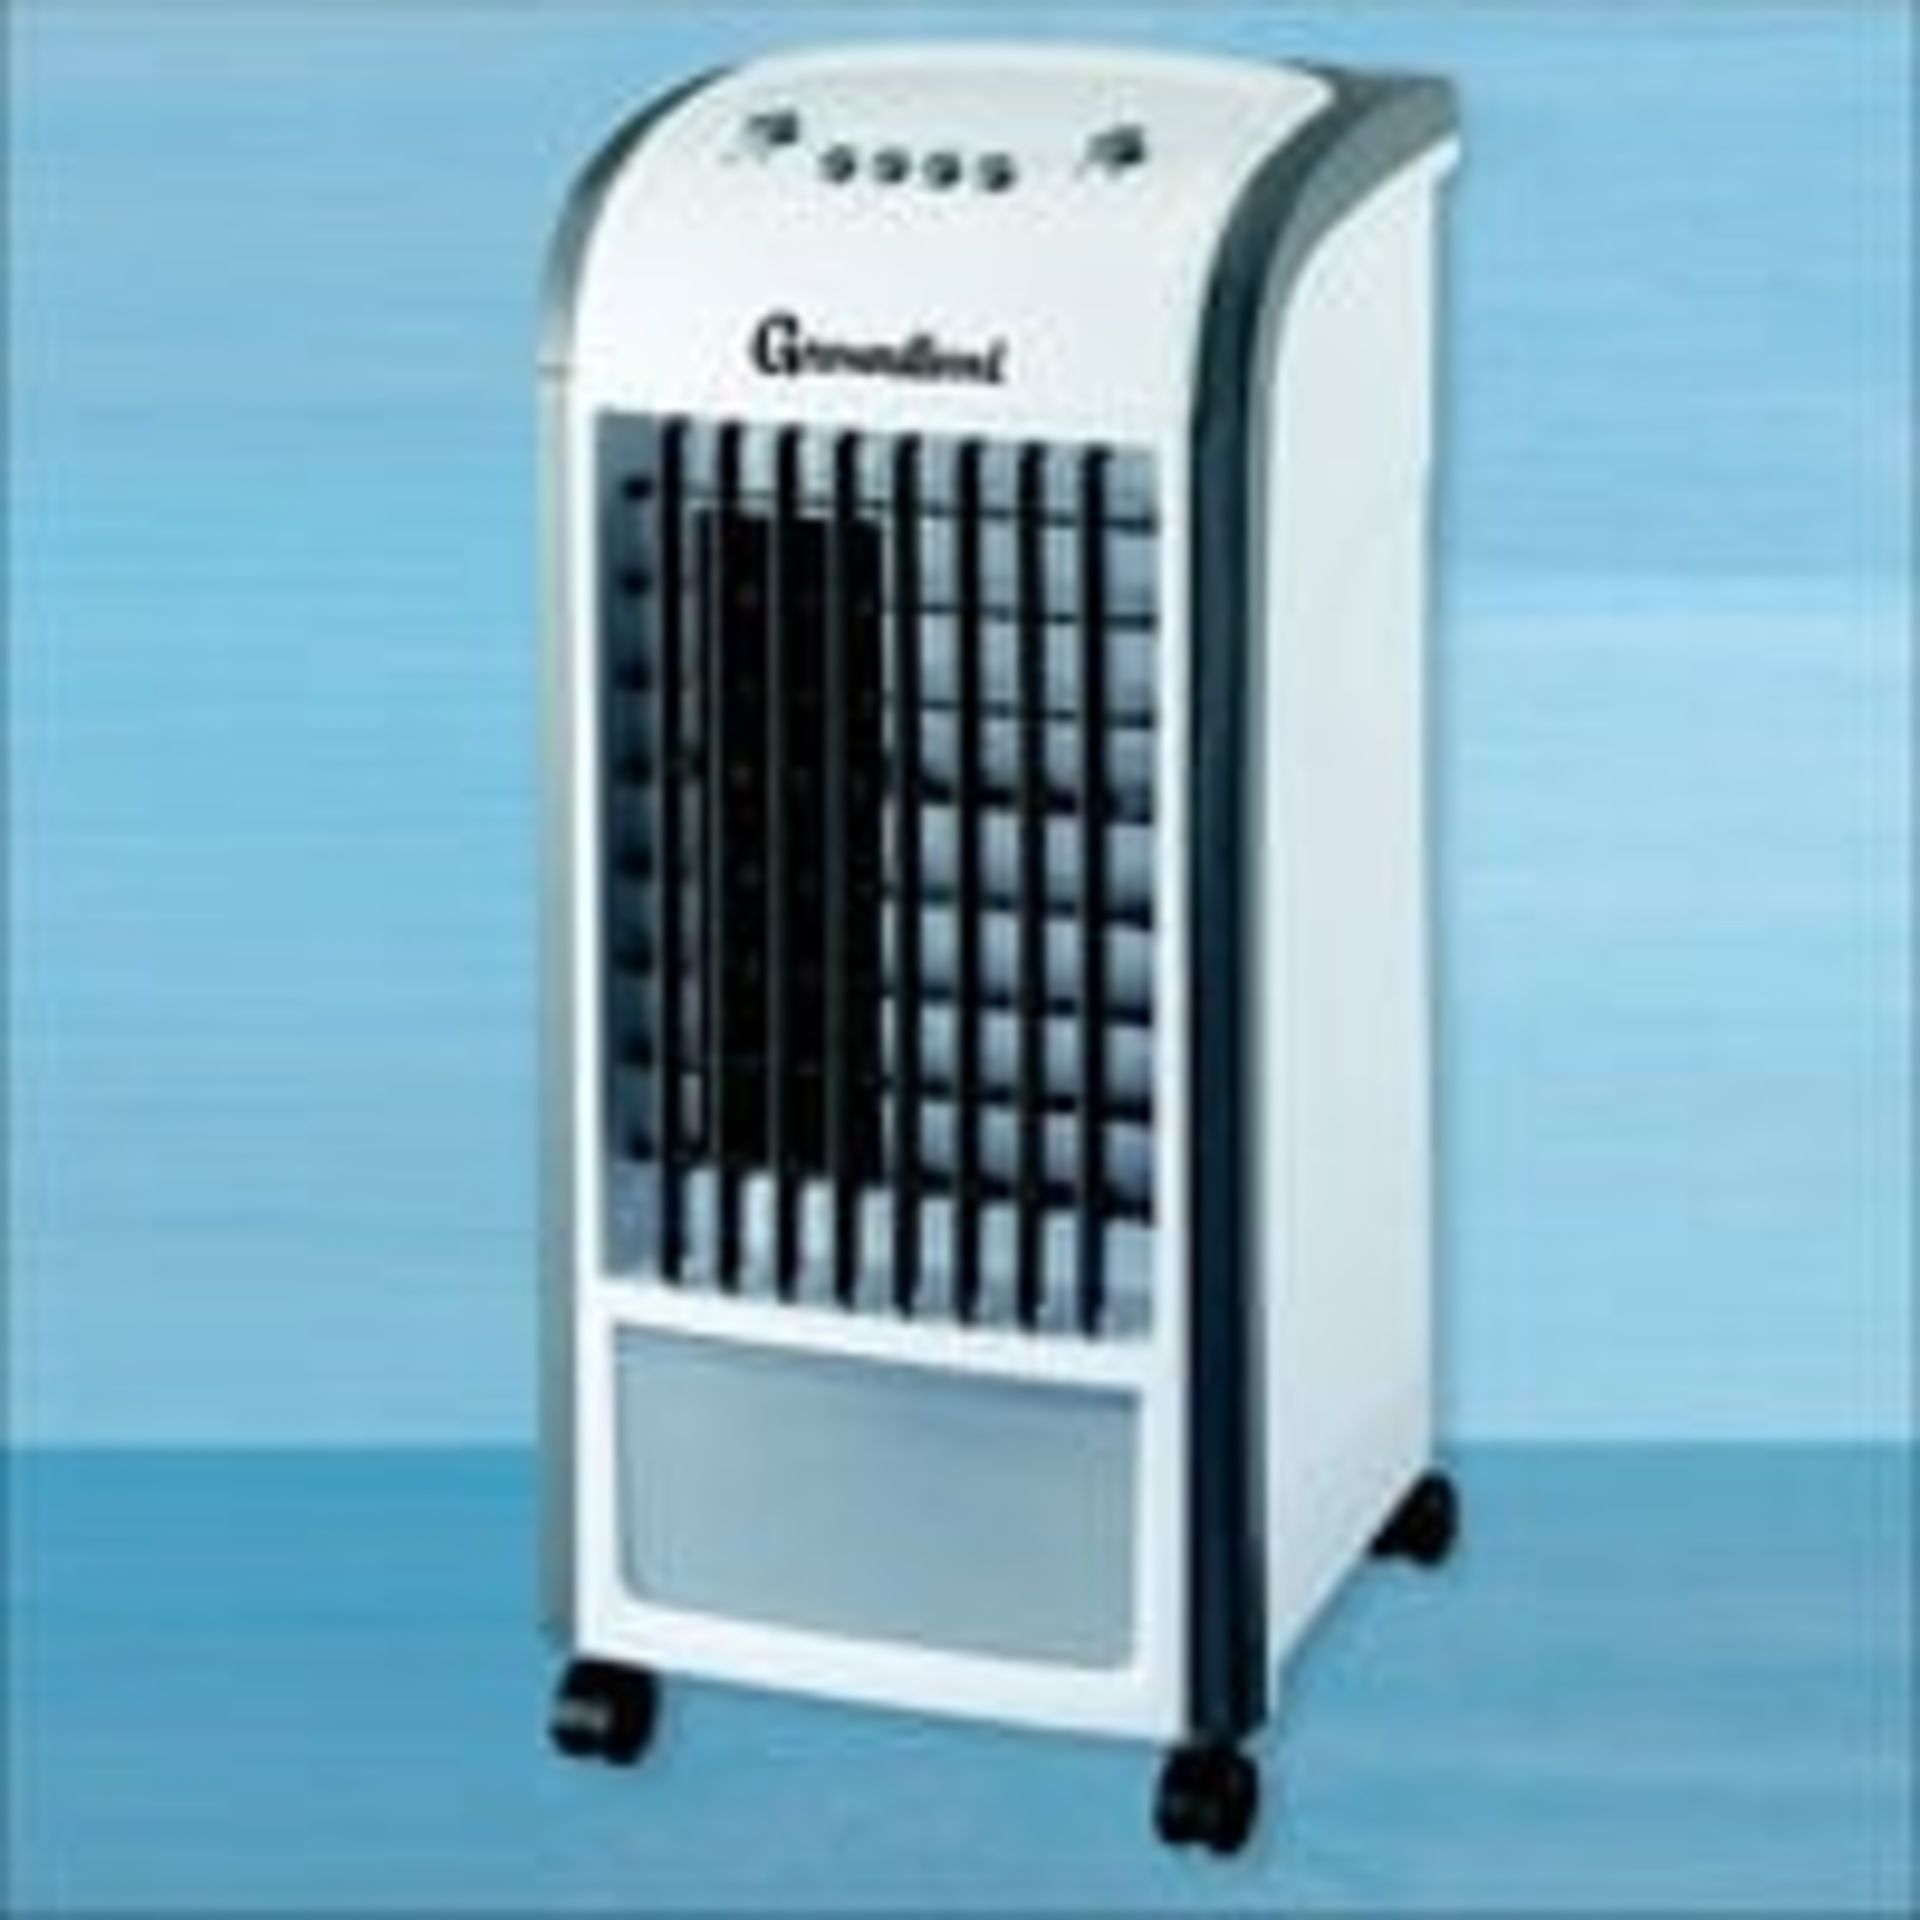 Easy Move Portable Air Conditioner RRP £72.99. - Image 2 of 2